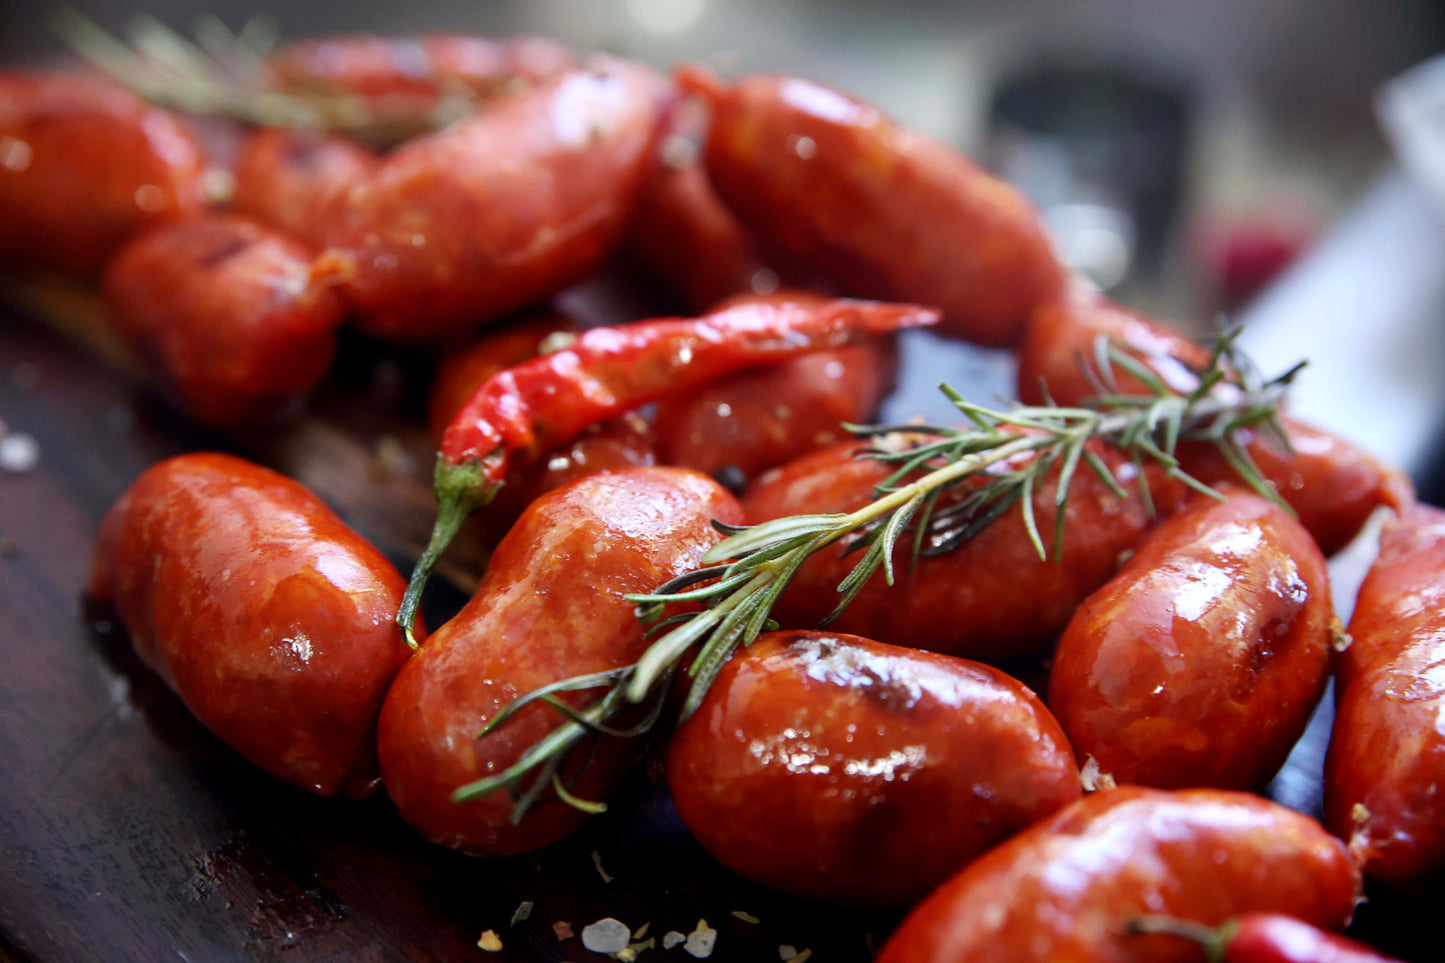 HOT Fresh Spanish Chorizito Choricito Mini Chorizo 24 piece pack approx. 900g packet. Regular price $17.00. [You are guaranteed to receive at least 855g of product, equivalent price of $20.00 per kg.]